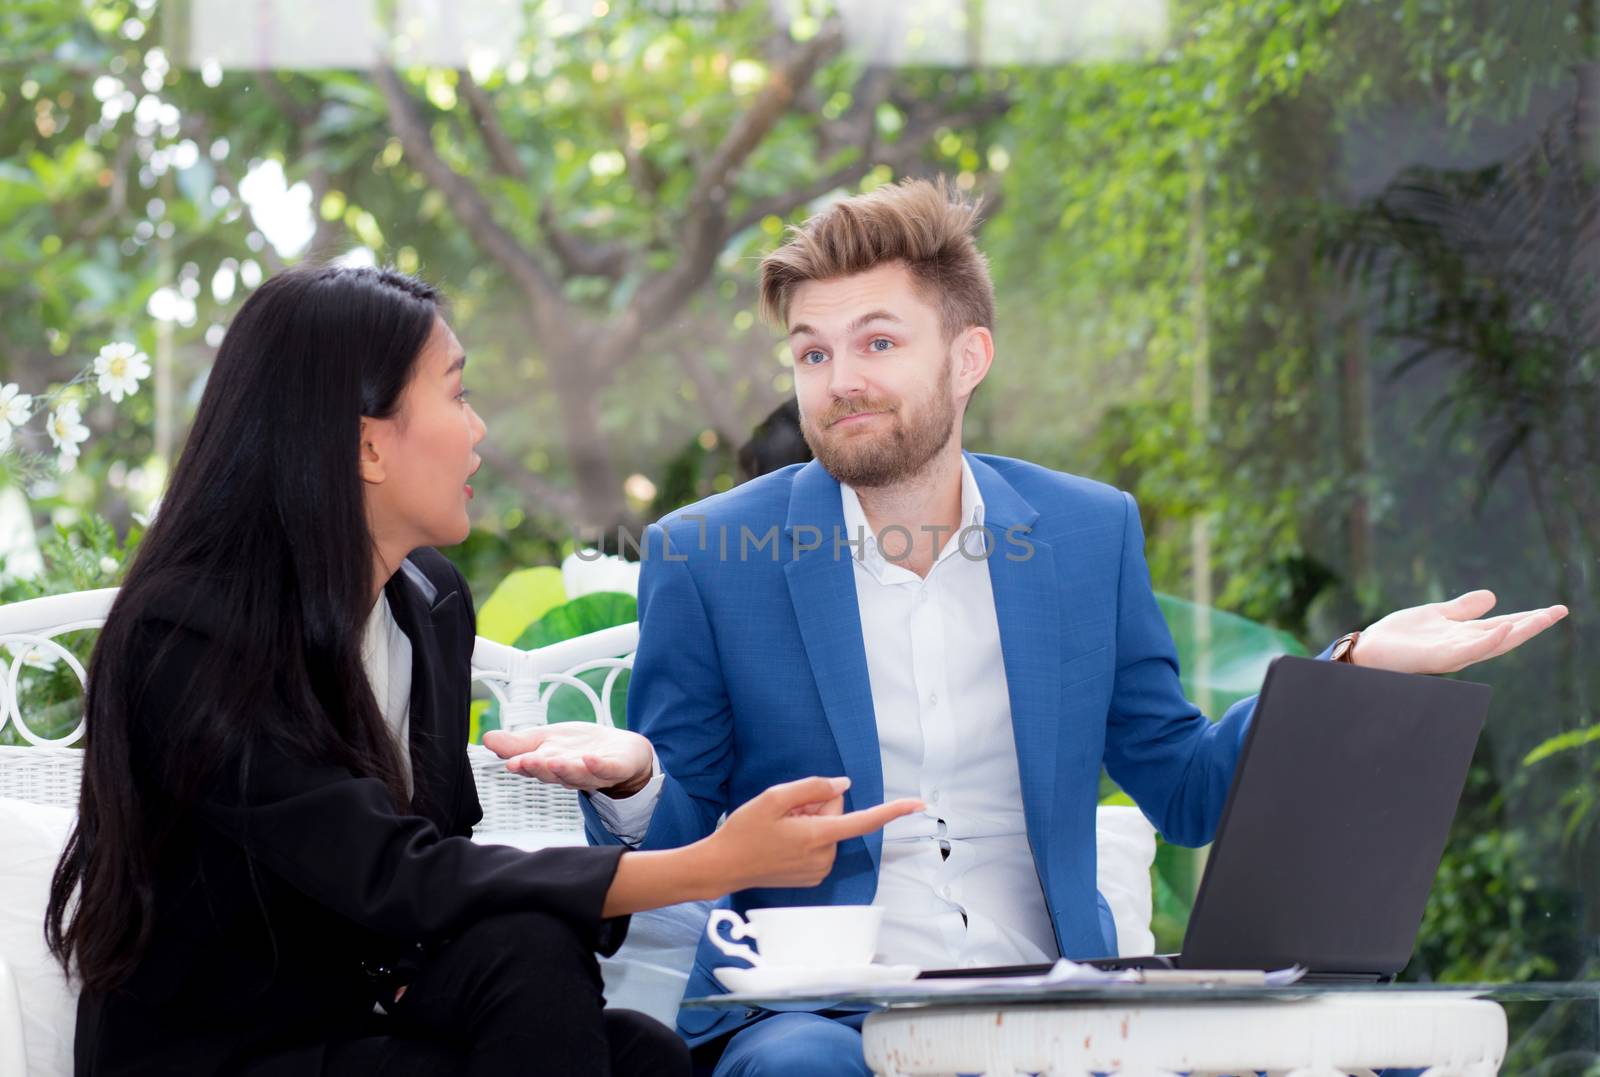 technology and office concept - two business man and woman with laptop - tablet pc computer and papers having discussion in office.